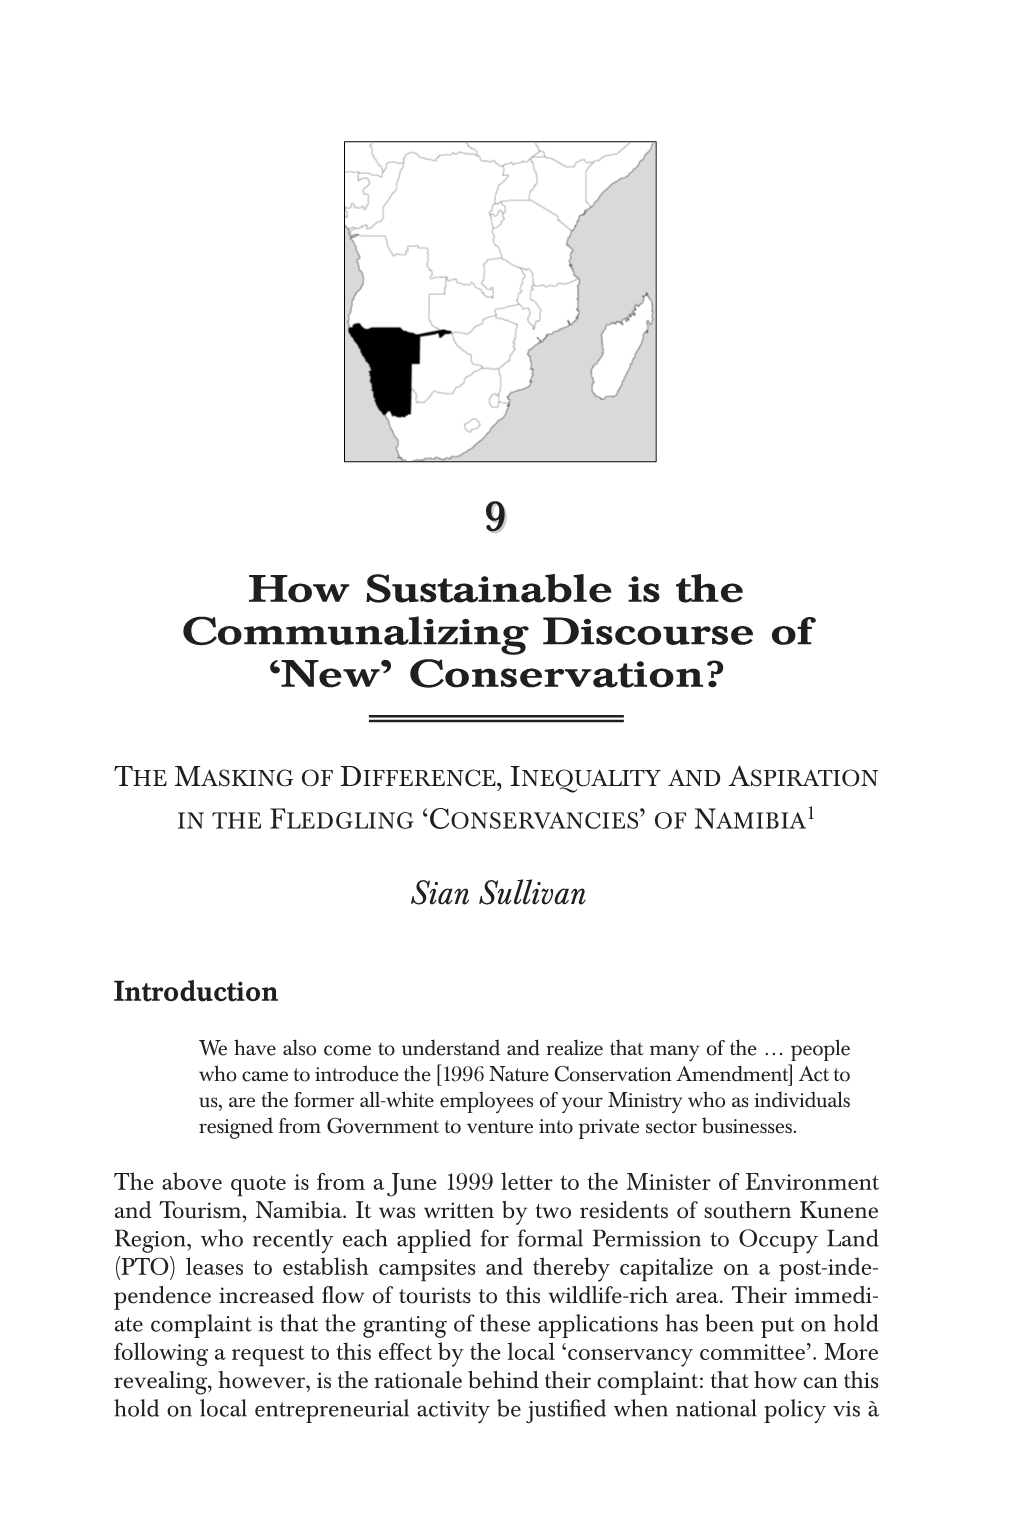 How Sustainable Is the Communalizing Discourse of ‘New’ Conservation?